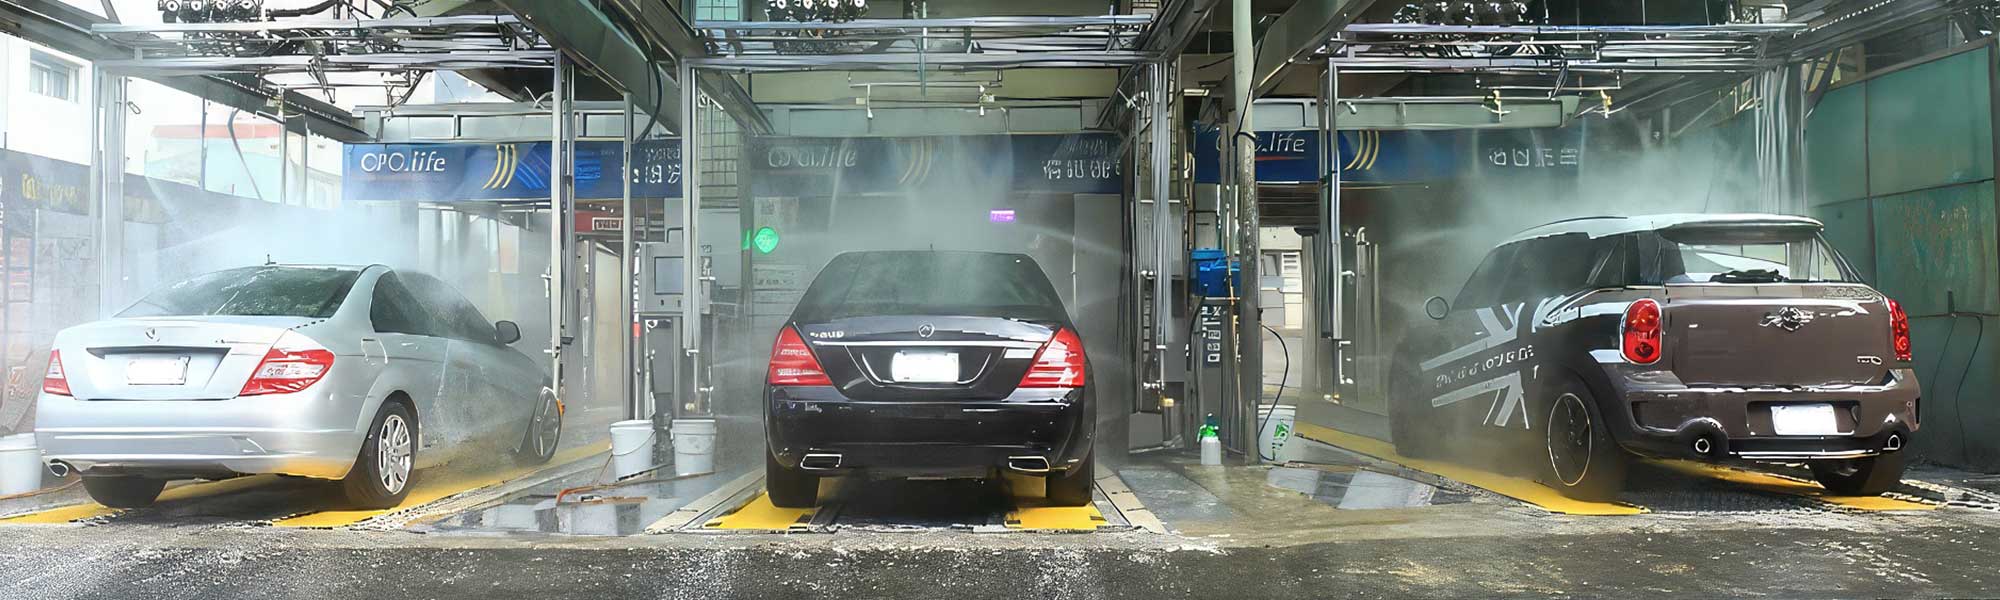 Valves in Self-Service Car Wash: Improving Performance and Results